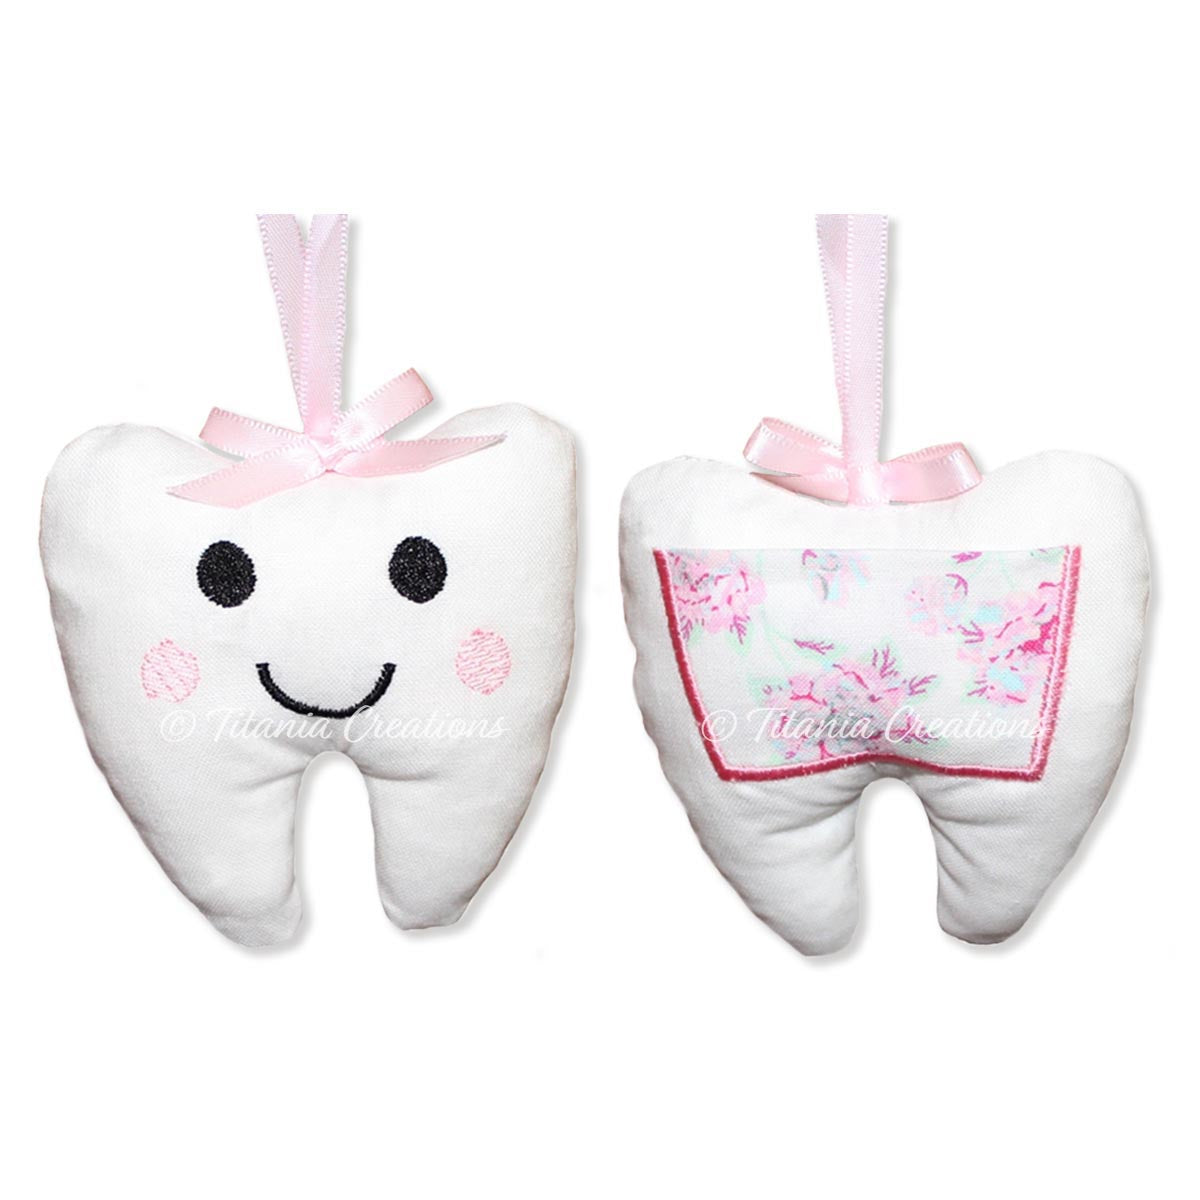 ITH Tooth Fairy Stuffie 4x4 5x7